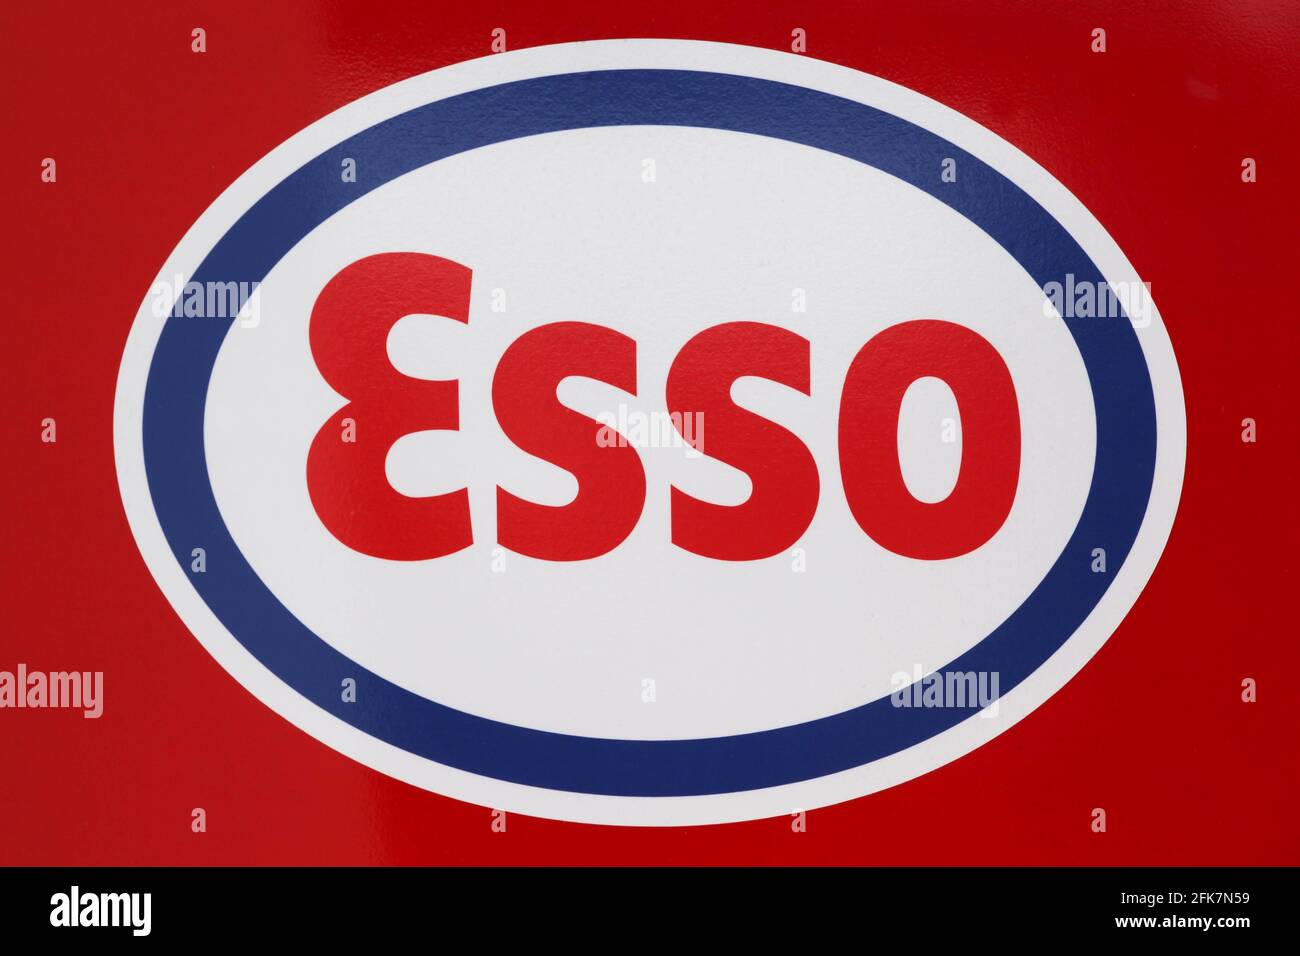 Villefranche, France - March 28, 2020: Esso logo on a panel. Esso is an international trade name for ExxonMobil Stock Photo